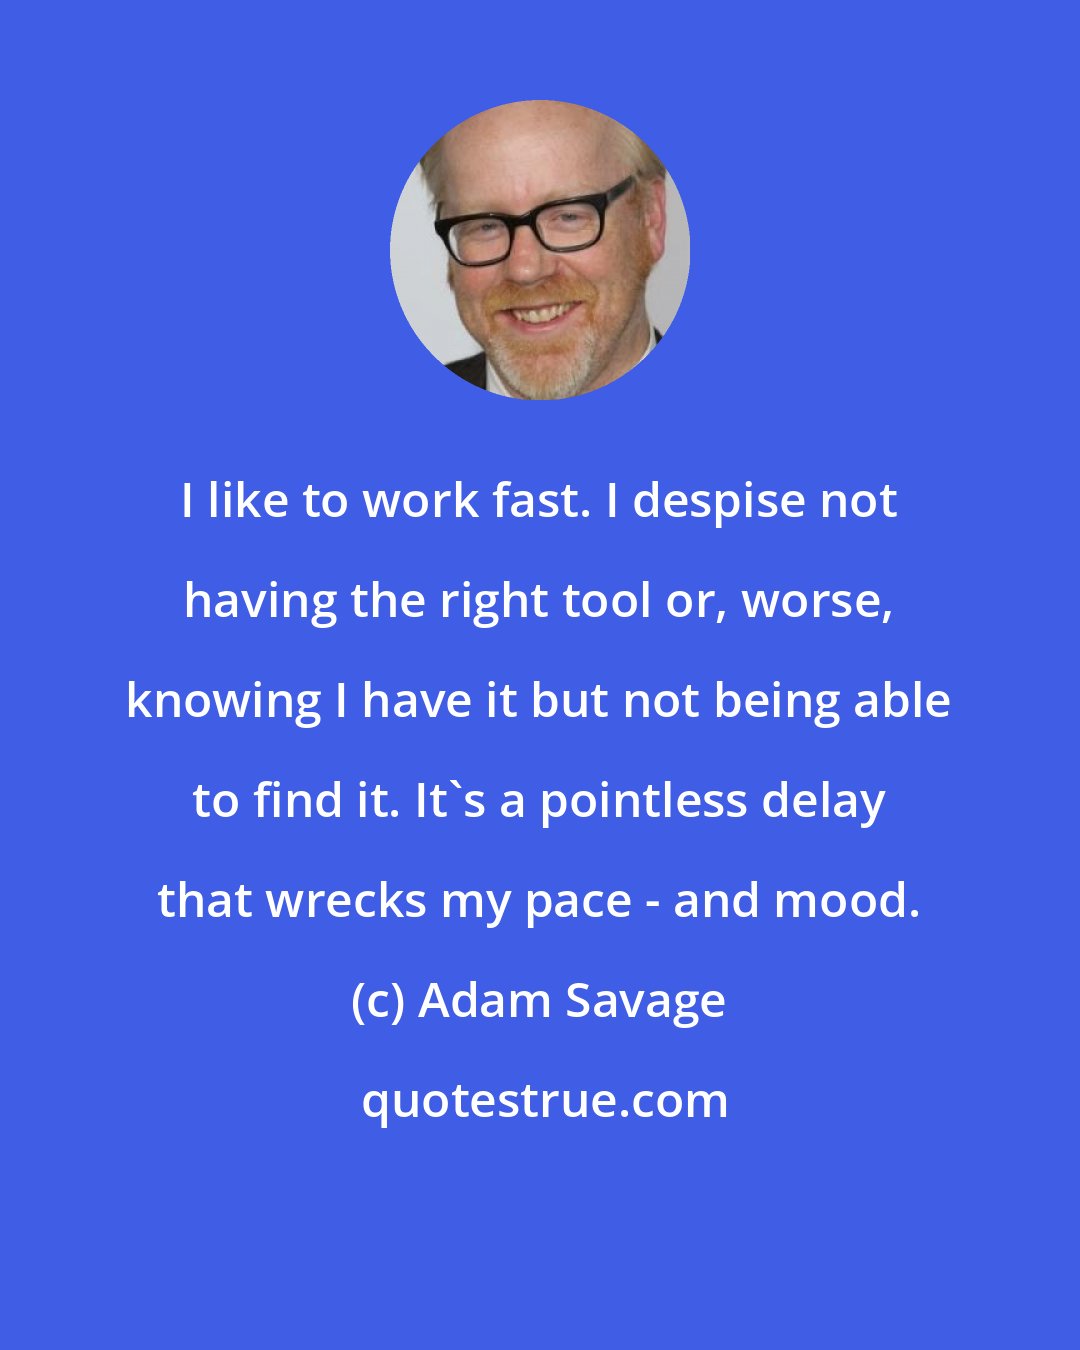 Adam Savage: I like to work fast. I despise not having the right tool or, worse, knowing I have it but not being able to find it. It's a pointless delay that wrecks my pace - and mood.